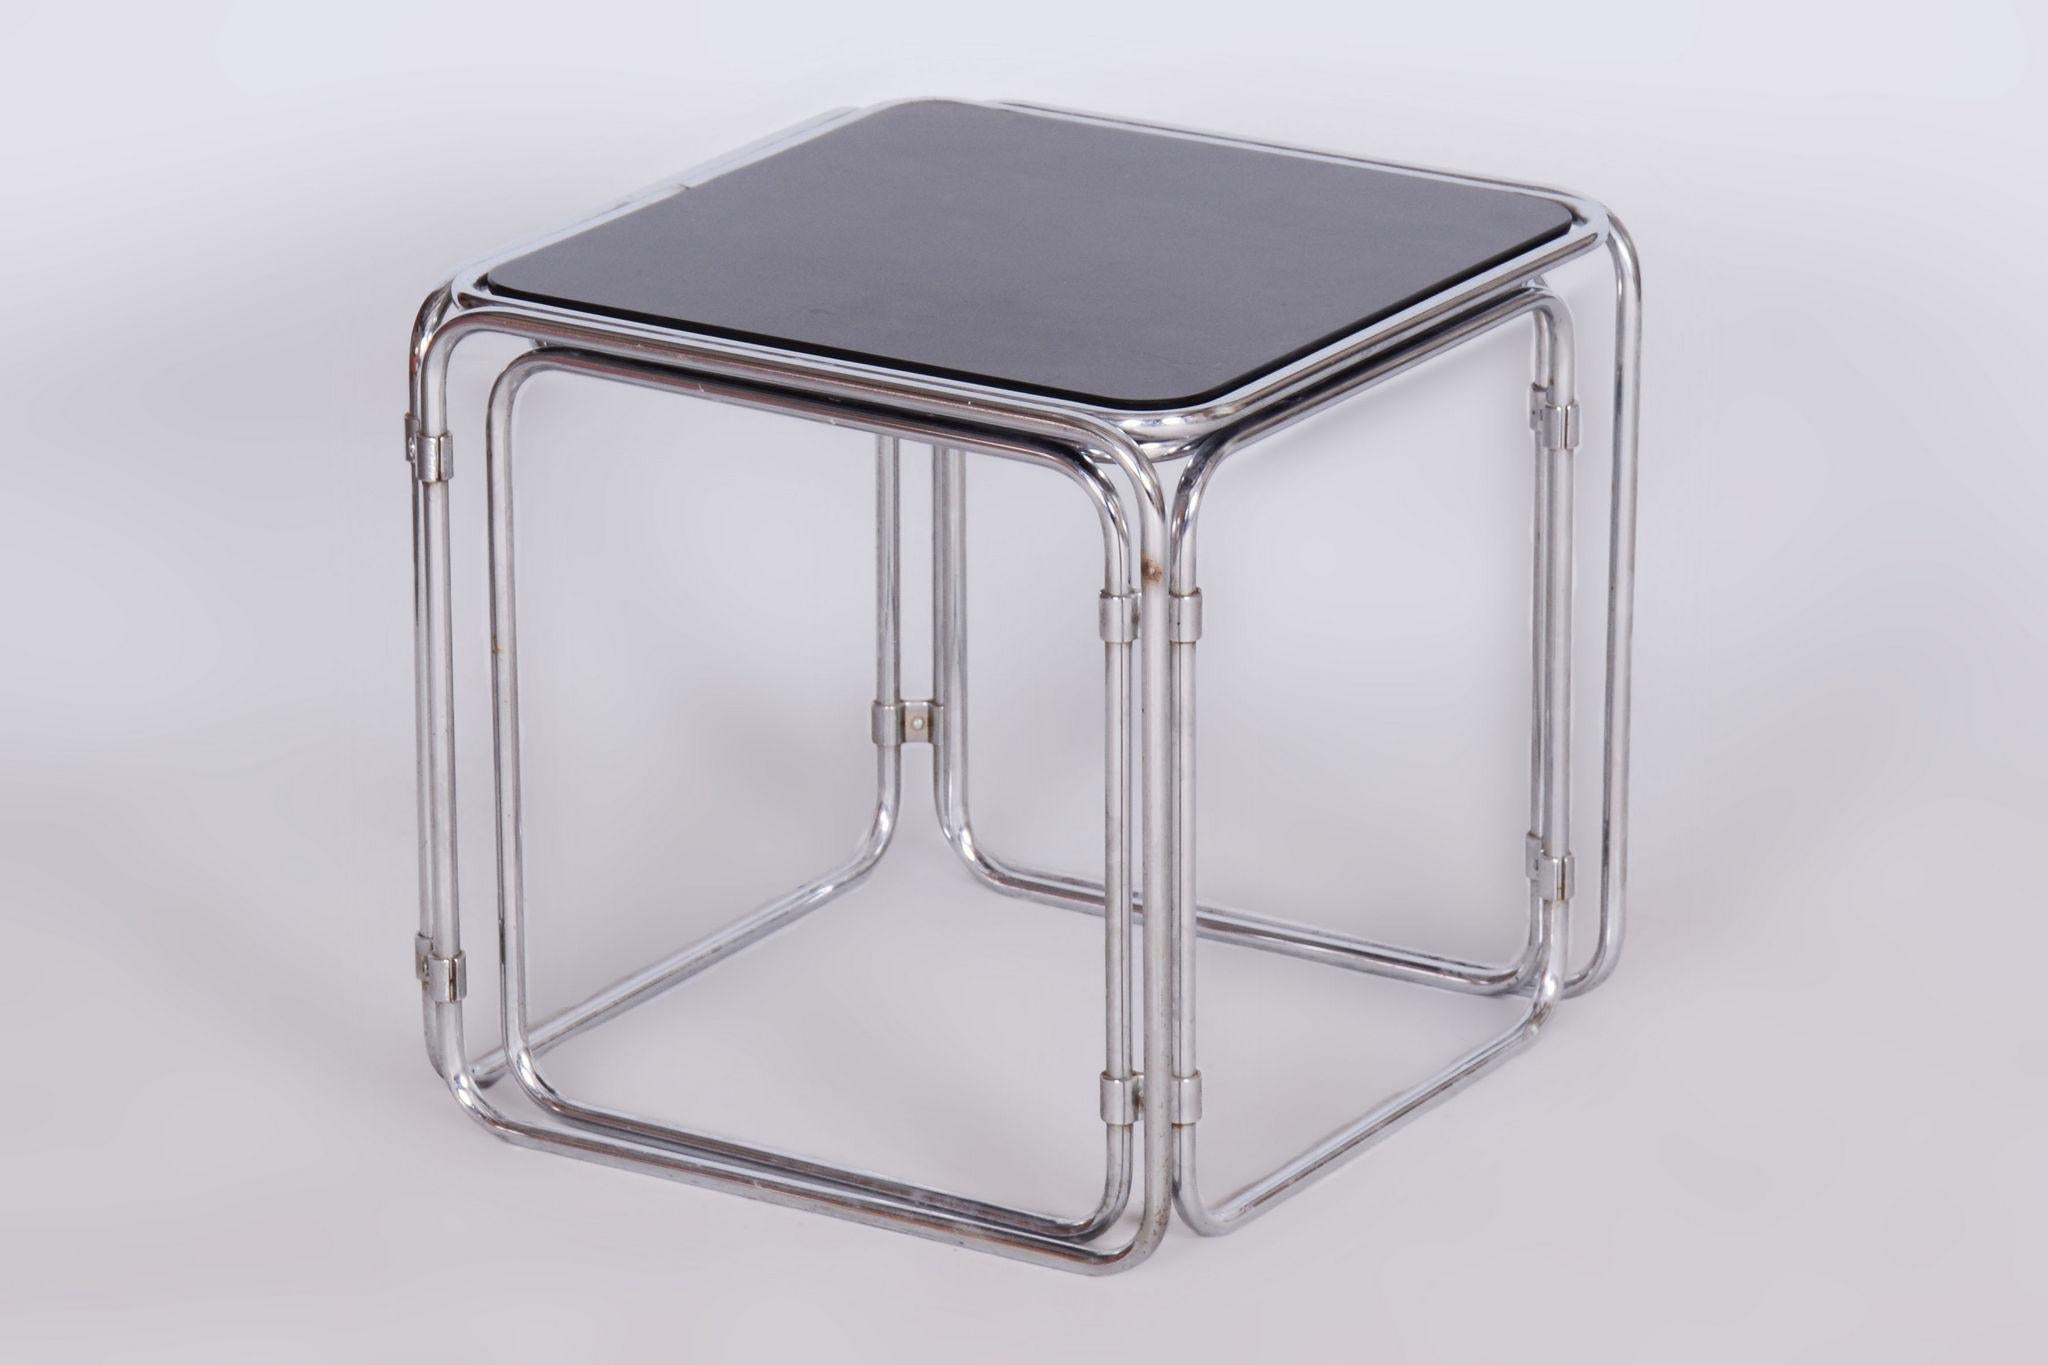 Restored Midcentury Nesting Tables, Chrome-Plated Steel, Glass, Czechia, 1960s For Sale 3